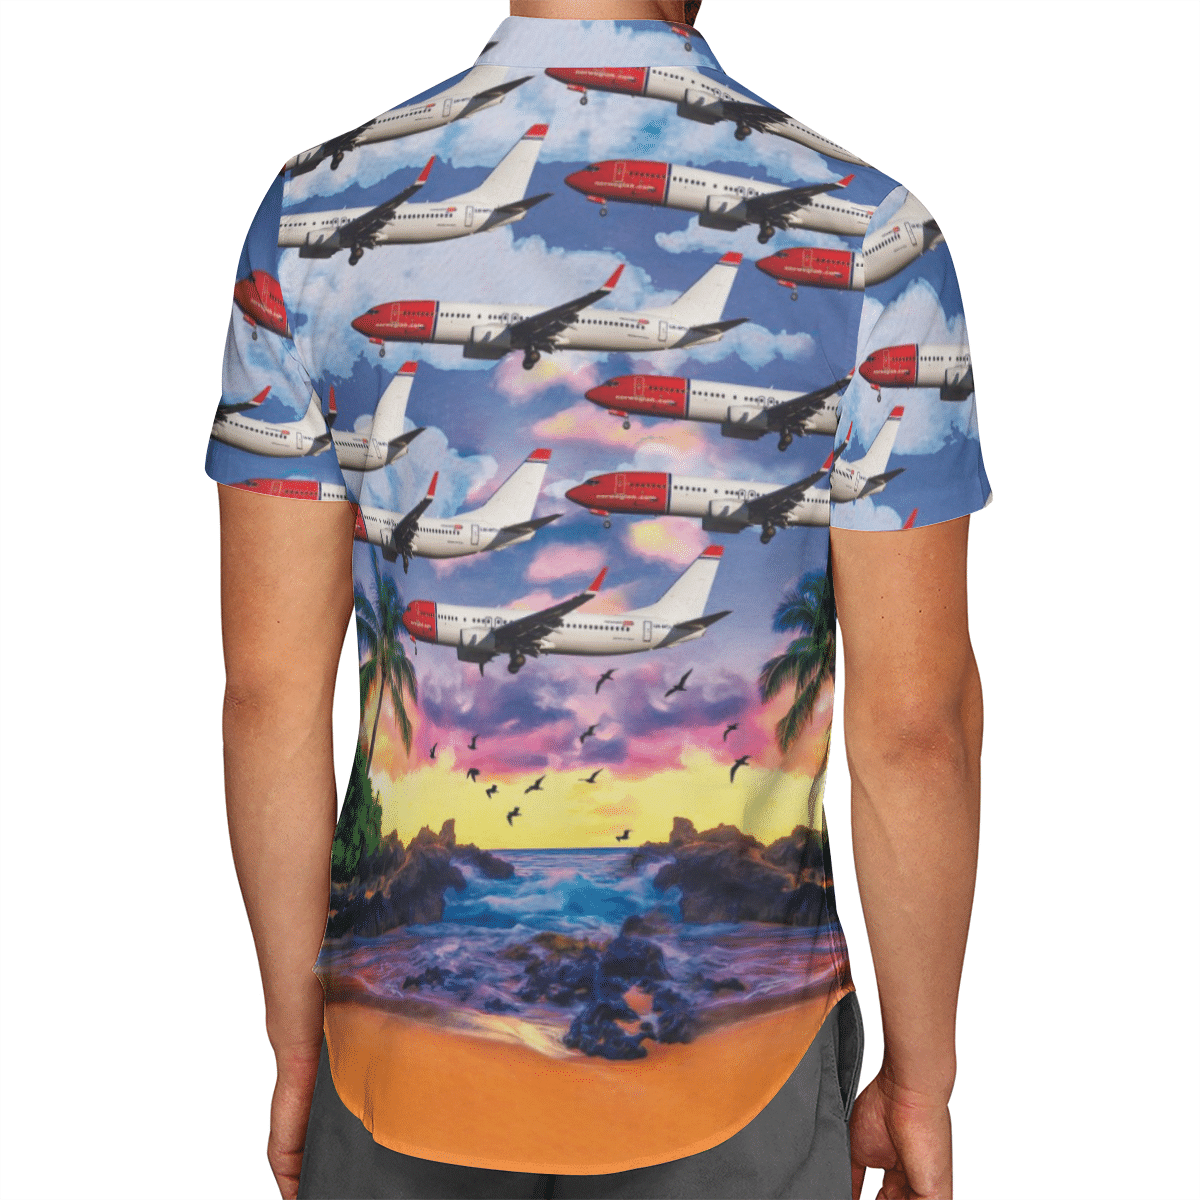 Going to the beach with a quality shirt 68